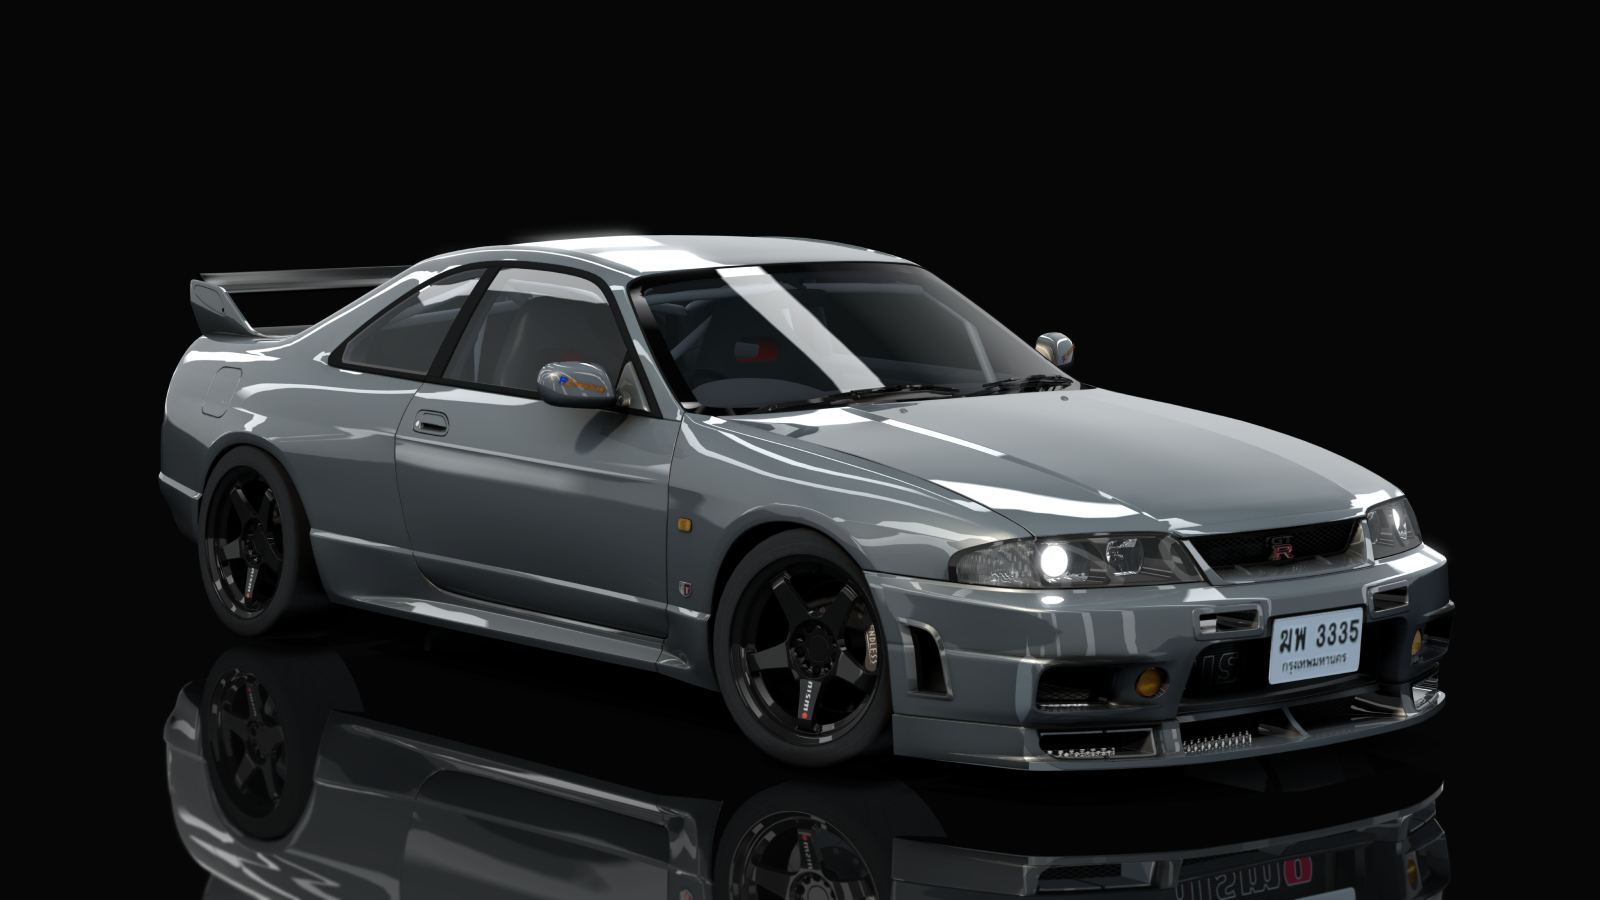 HOTHEAD21 Nissan Skyline GTR R33 Nismo Preview Image